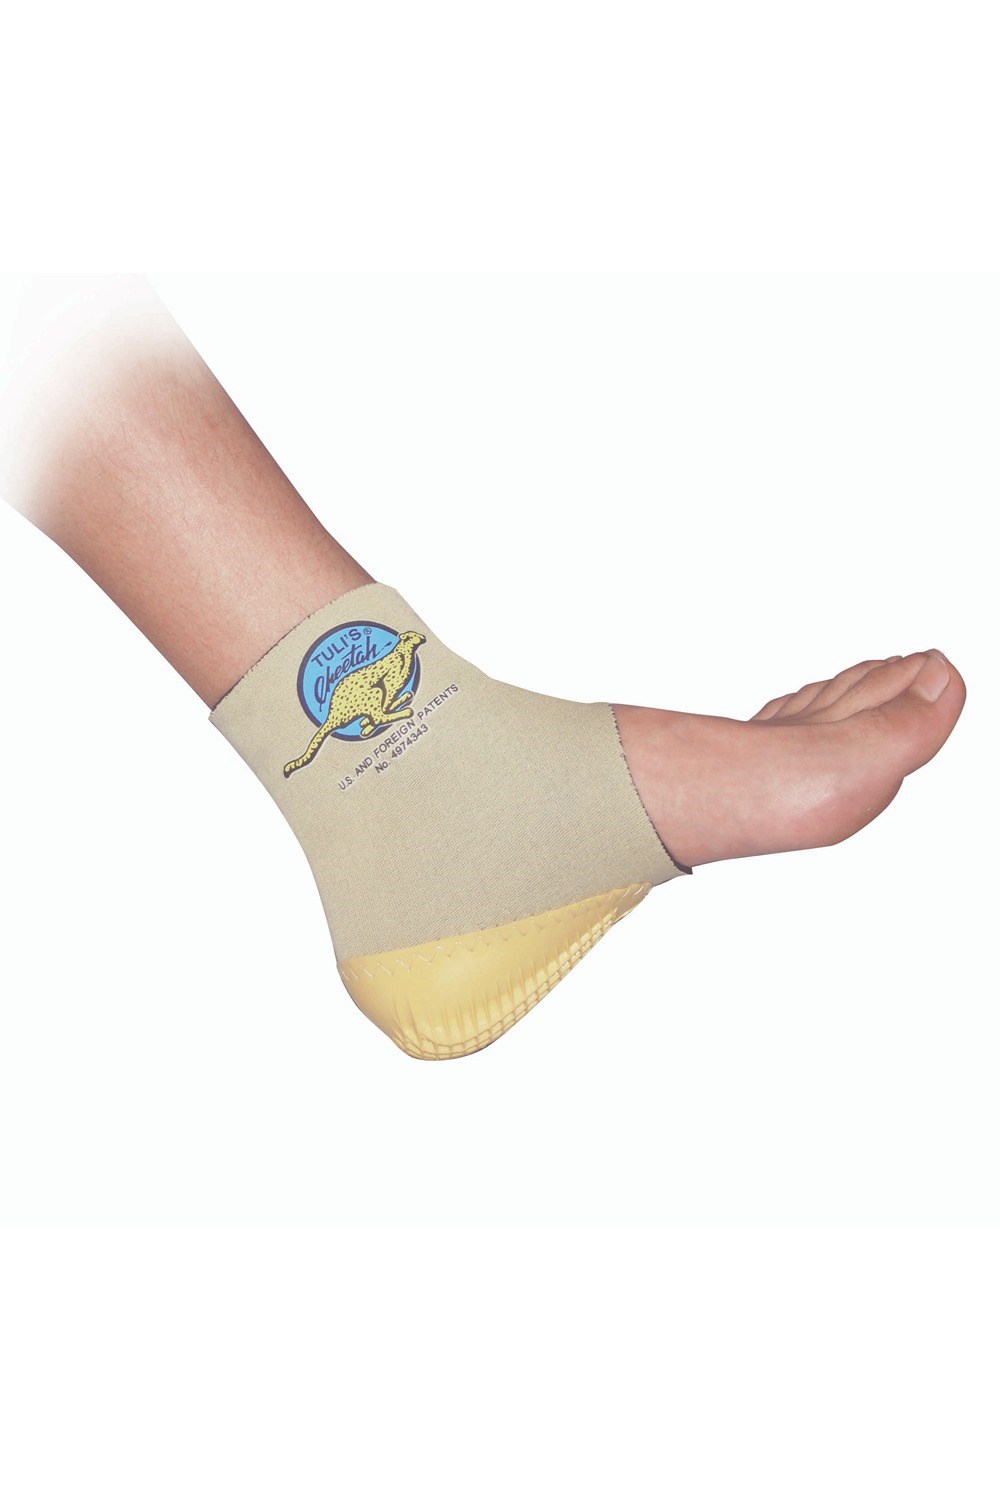 Cheetahs Ankle Support with Heel Cup -